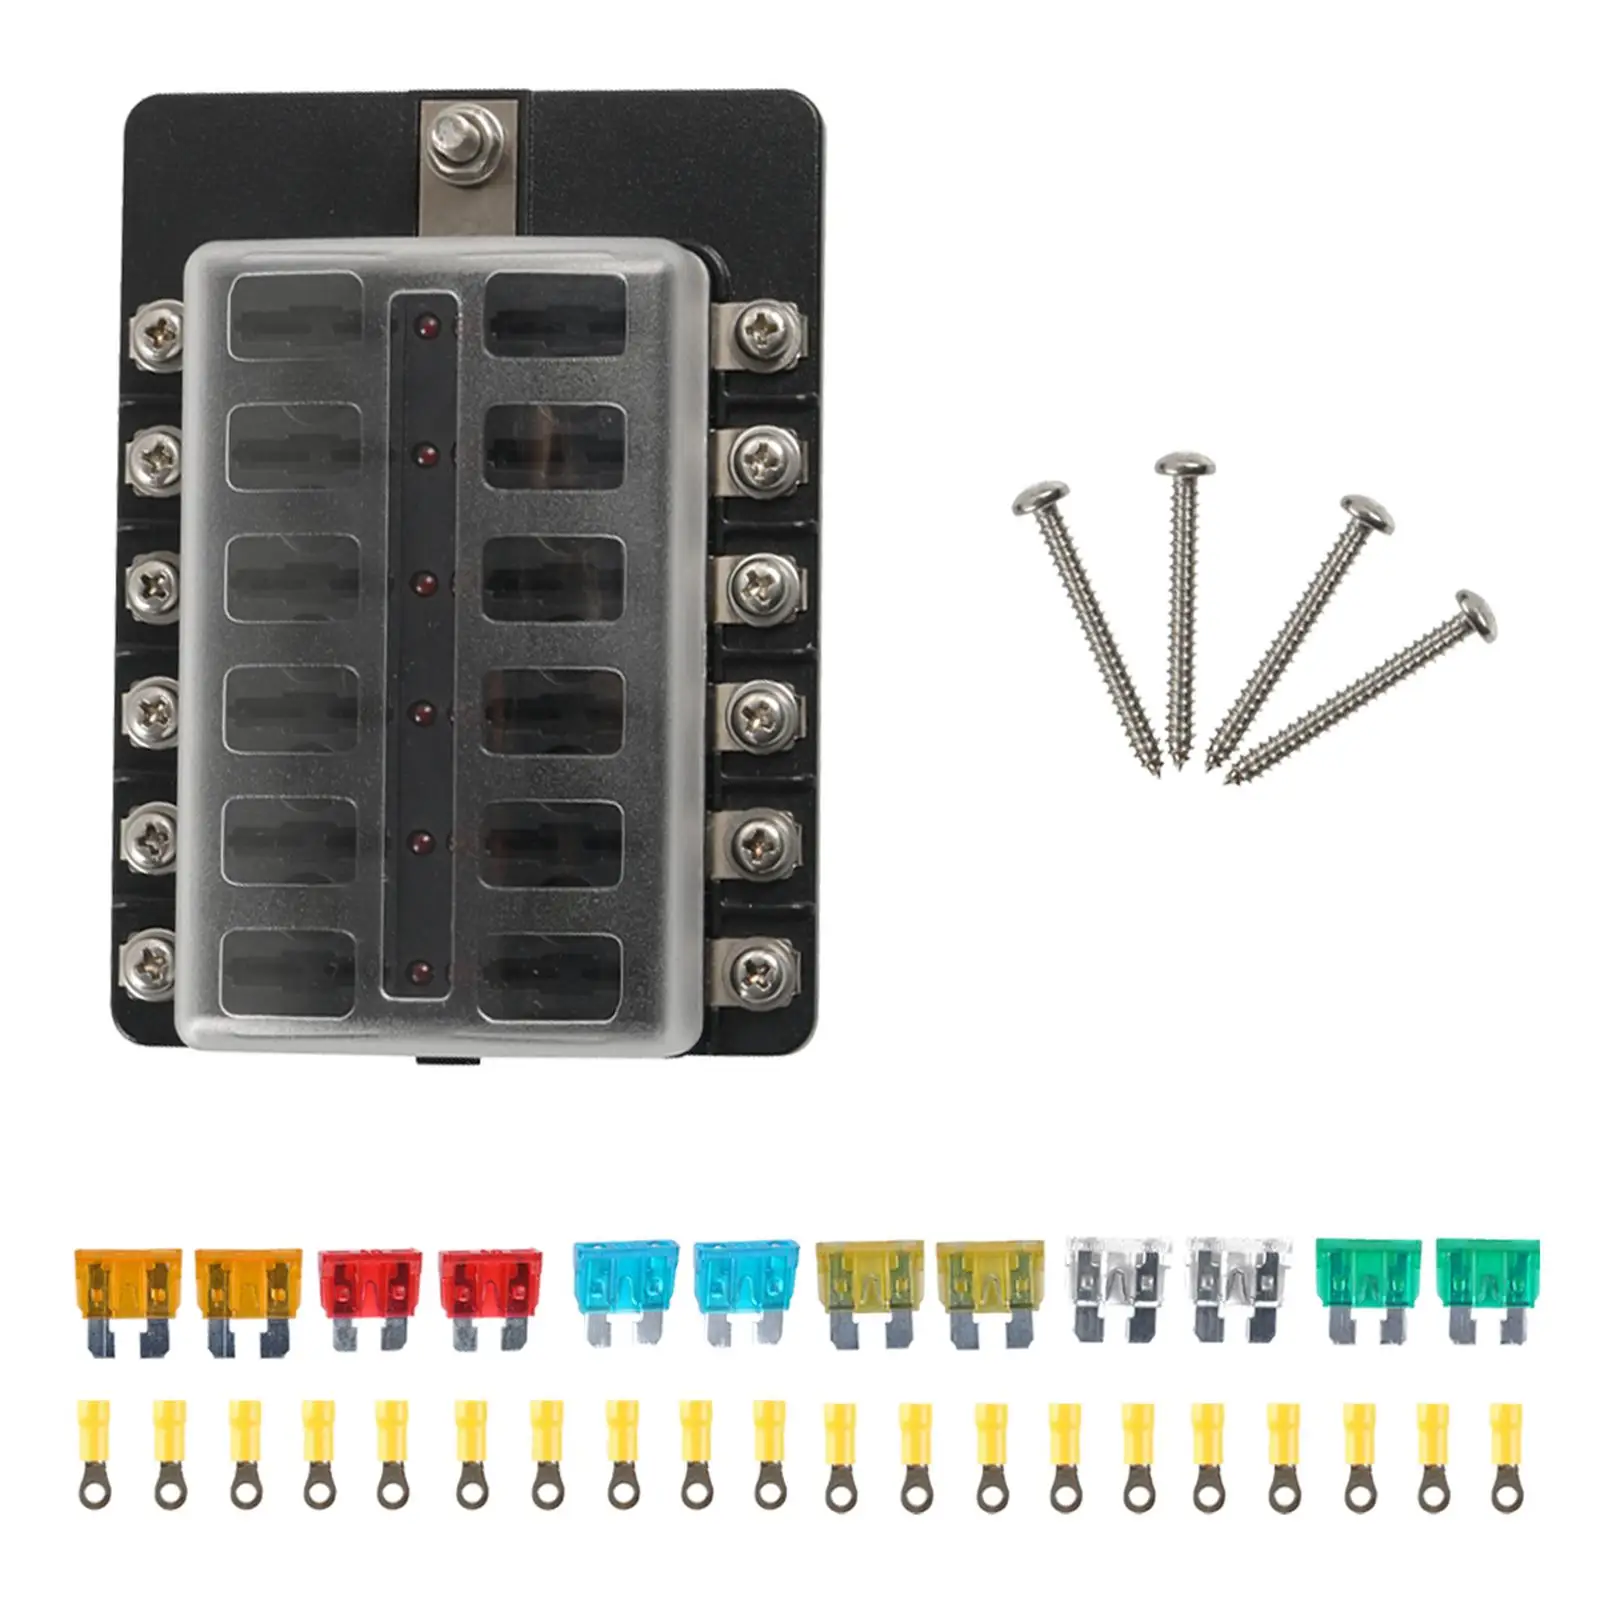 12 Way Blade Fuse Block with 12 Pcs Fuses Bolt Terminals with LED Indicator 12 Circuit Fuse Box Holder Fit for Truck Car Marine